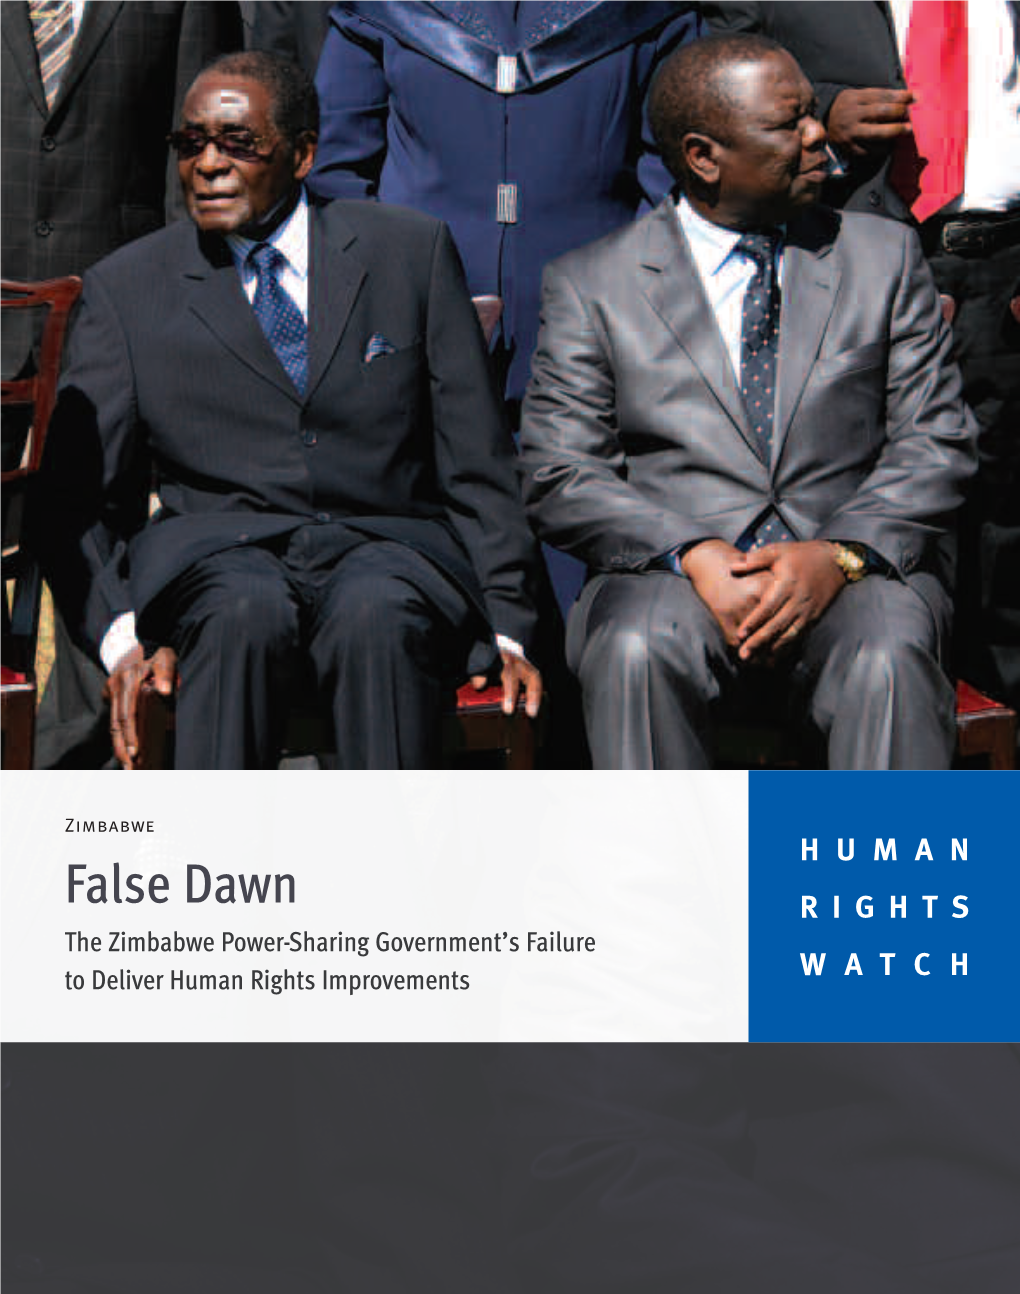 False Dawn RIGHTS the Zimbabwe Power-Sharing Government’S Failure to Deliver Human Rights Improvements WATCH